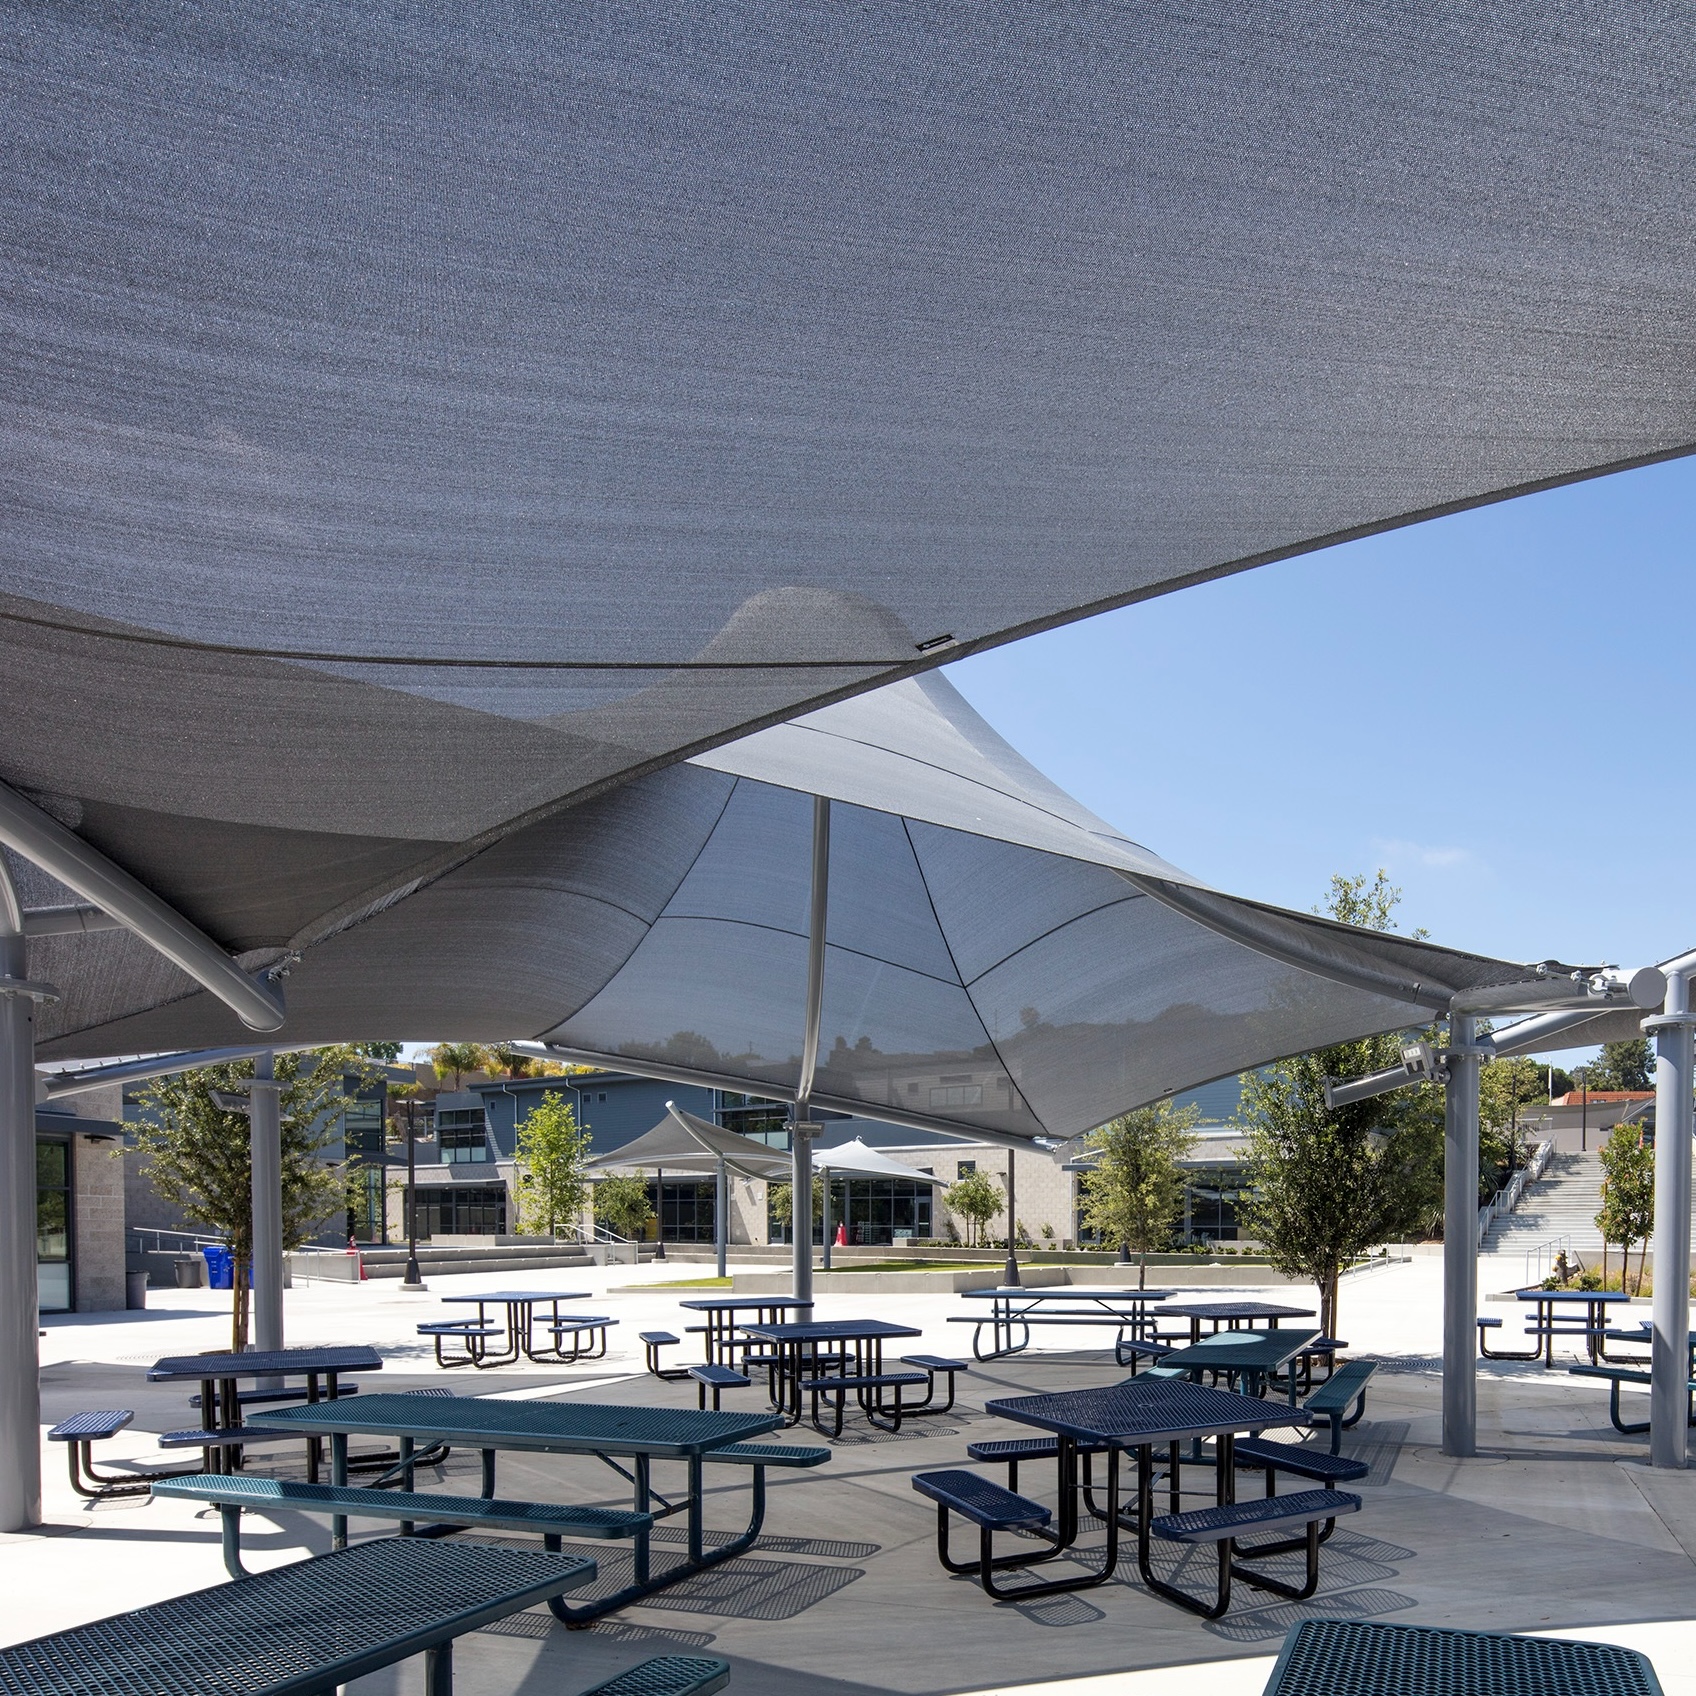 shade structure in a school courtyard thumbnail